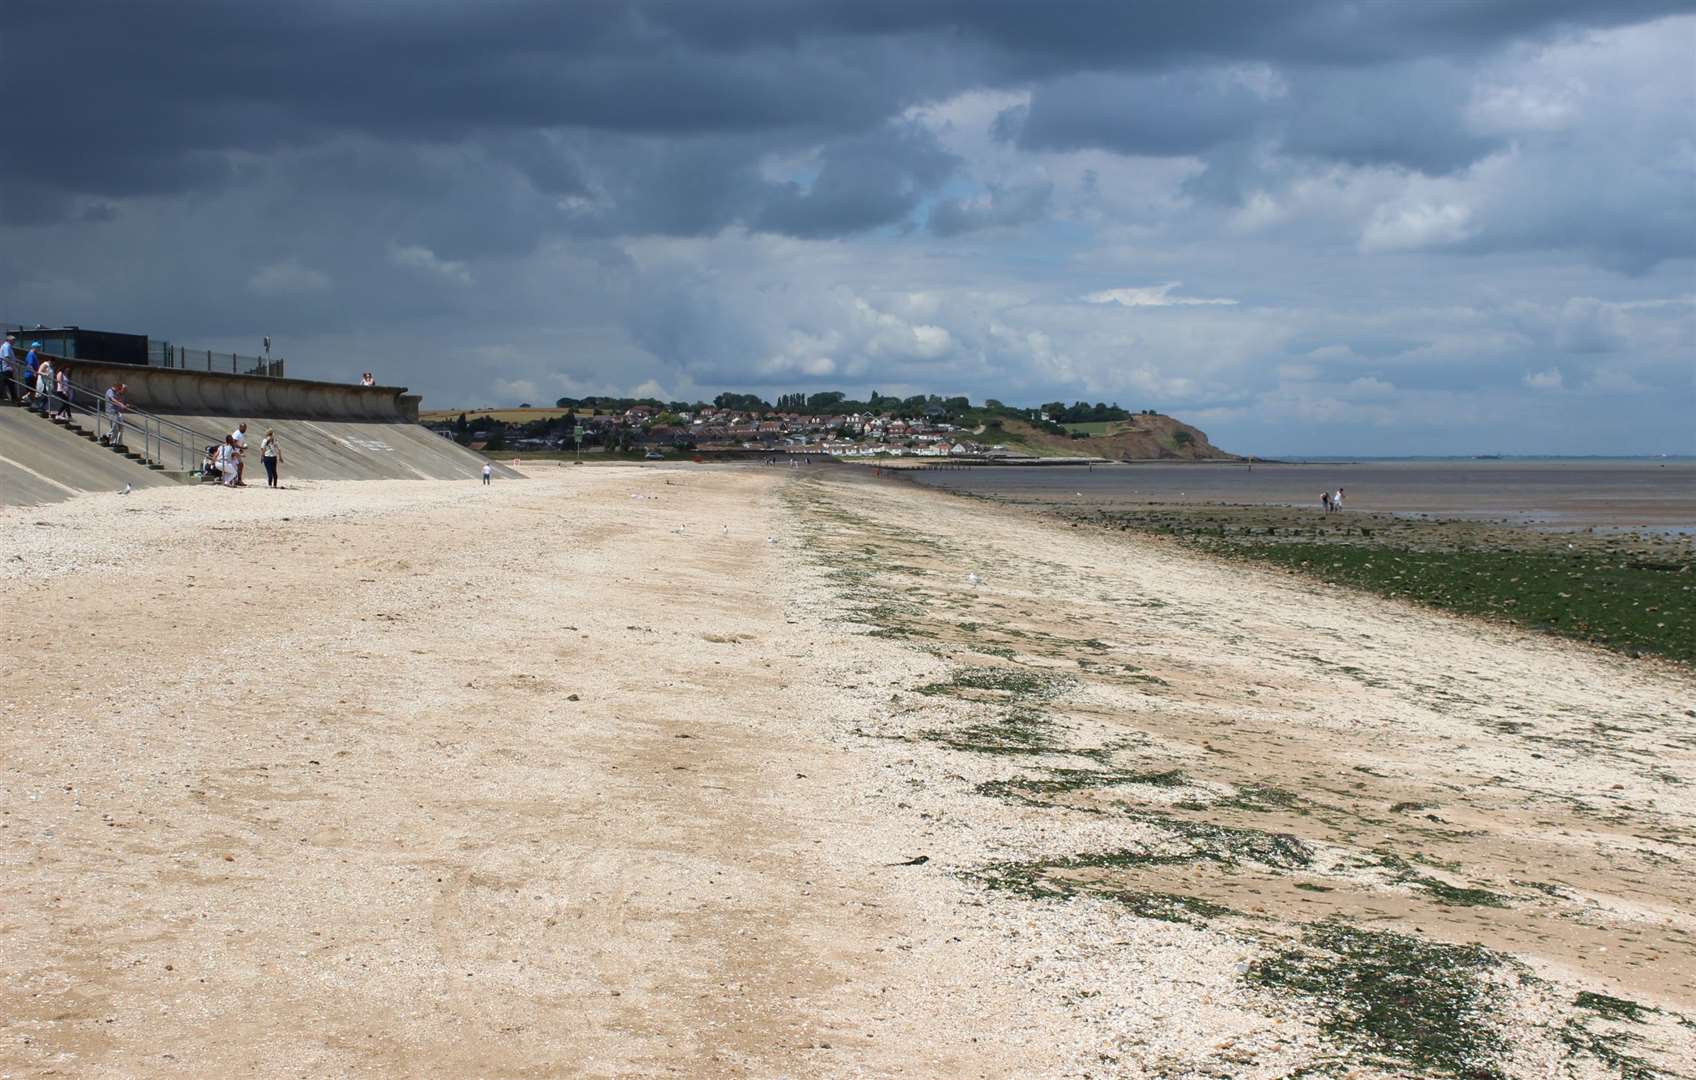 Leysdown-on-Sea beach in the Isle of Sheppey have been awarded with a Blue Flag status